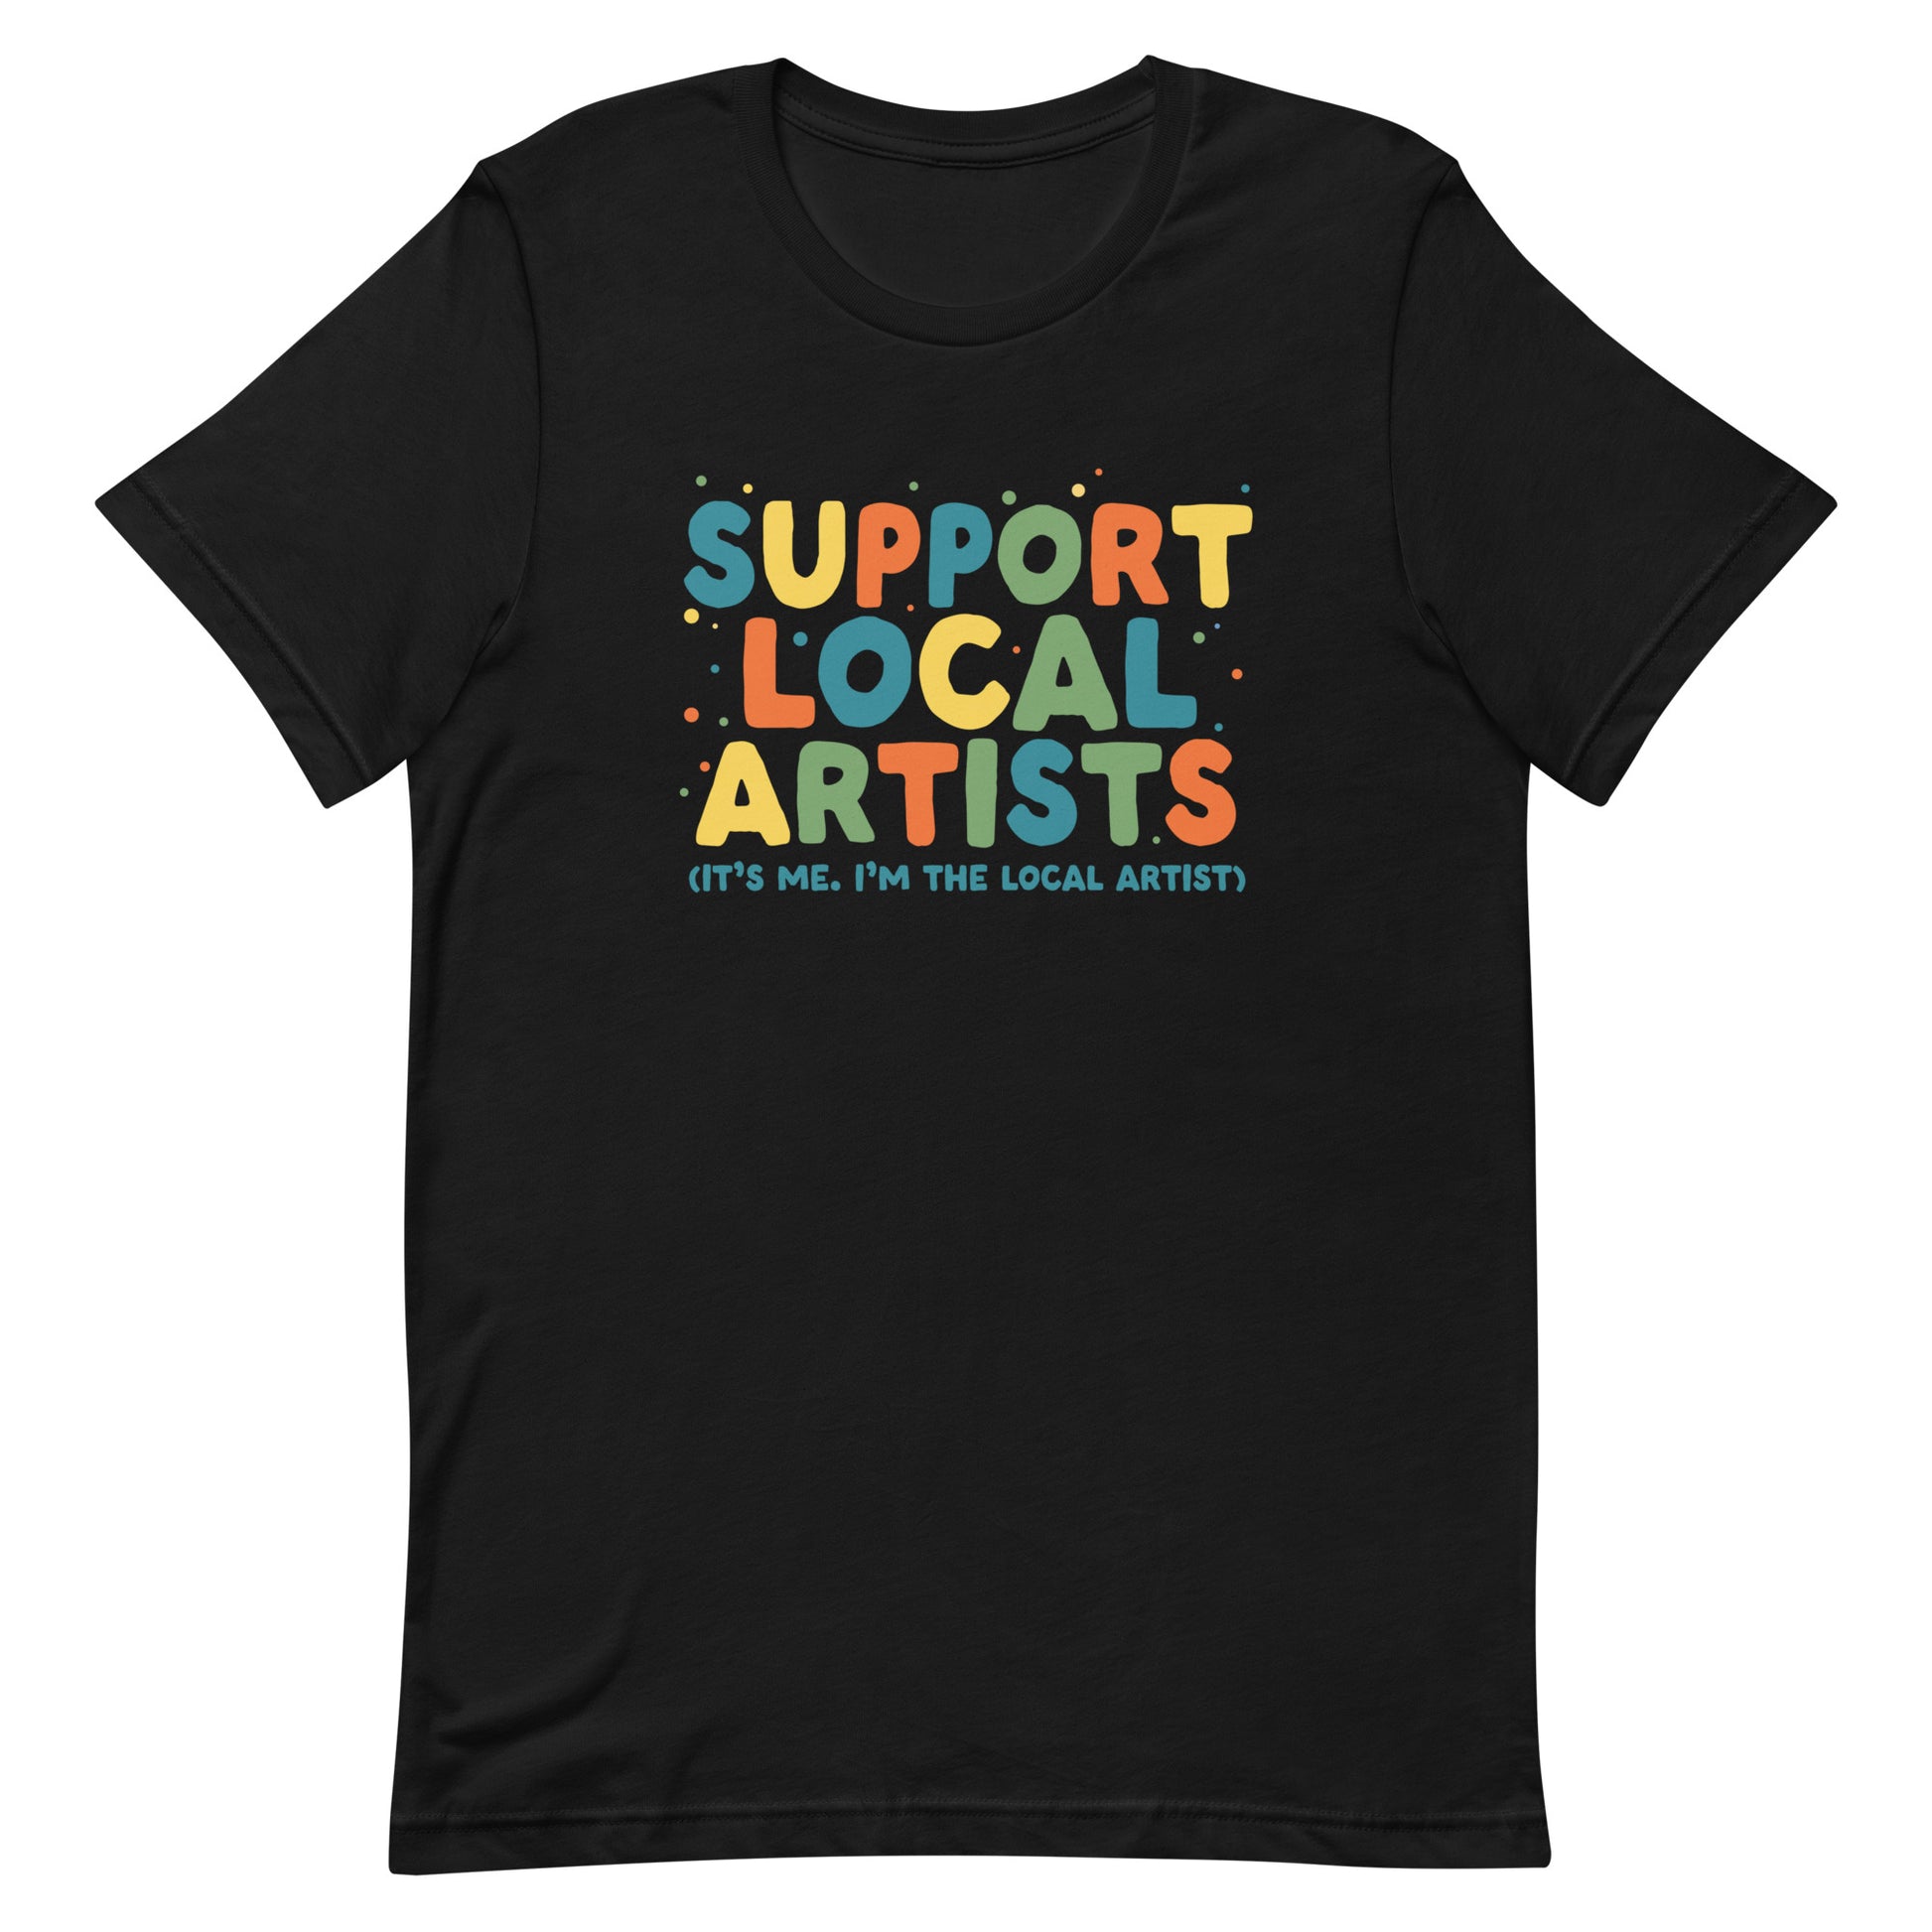 A black crewneck t-shirt with bold, colorful text that reads "Support Local Artists (It's me. I'm the local artist)"